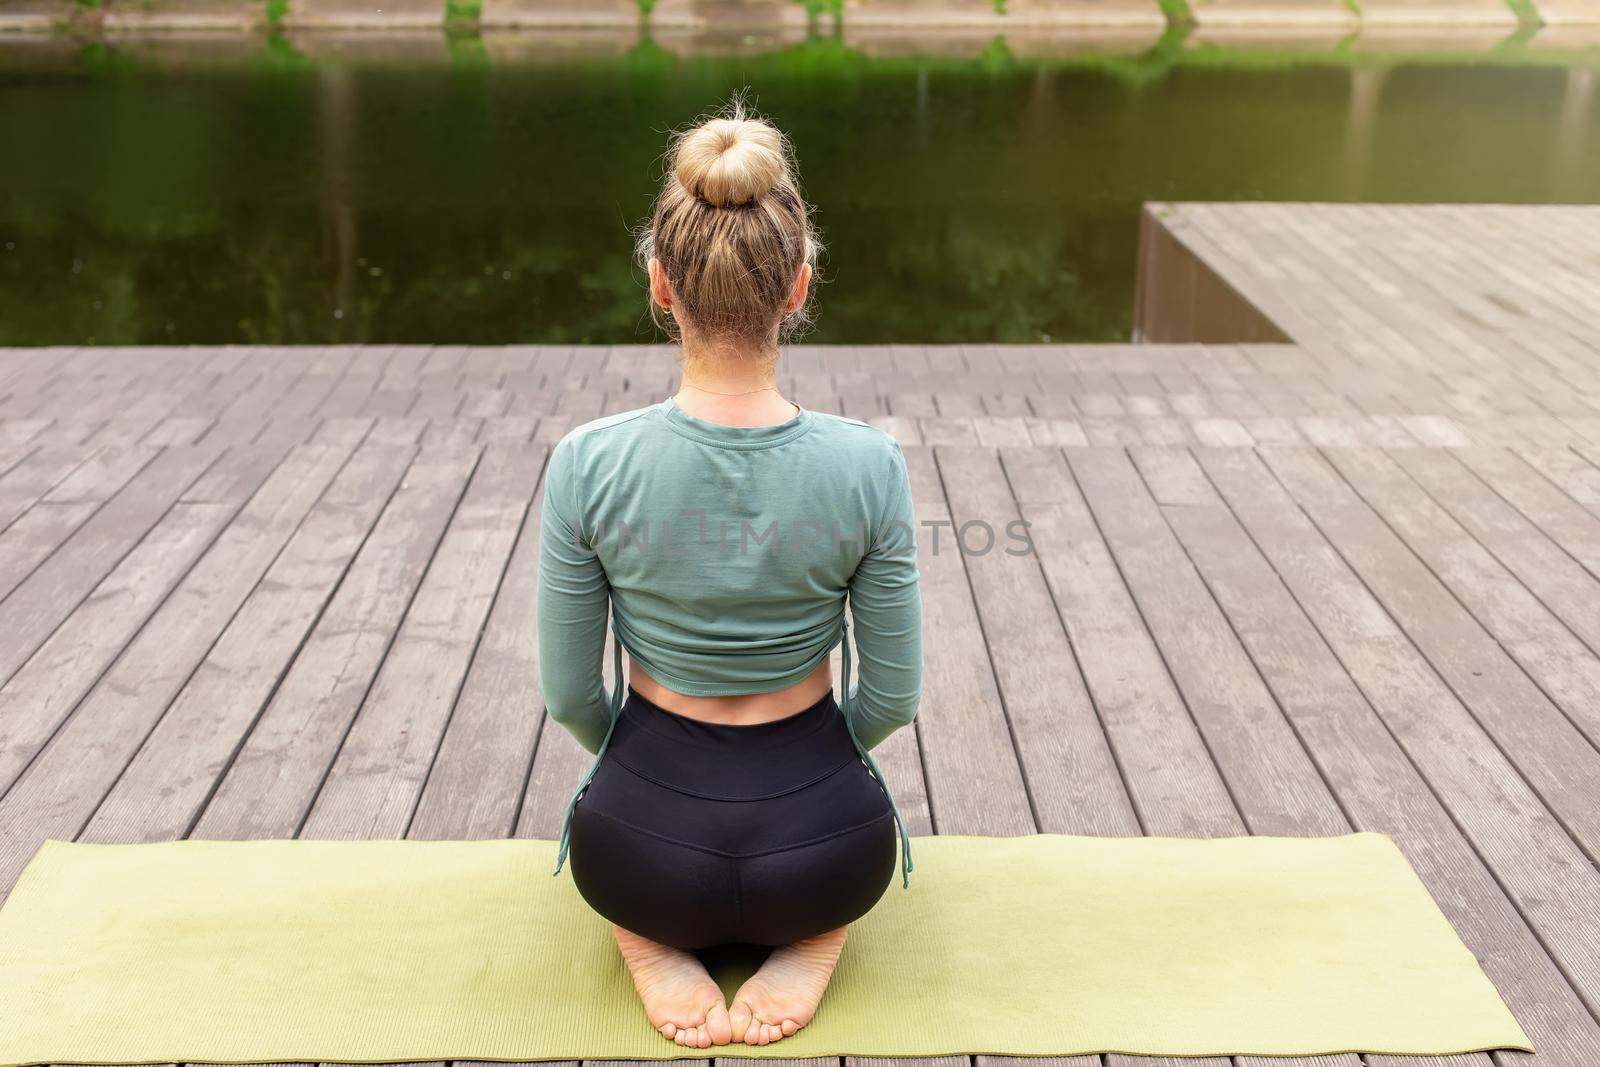 A slender woman in a green top and black leggings, sitting on a green sports mat, on a wooden platform by a pond in the park. Rear view. Copy space